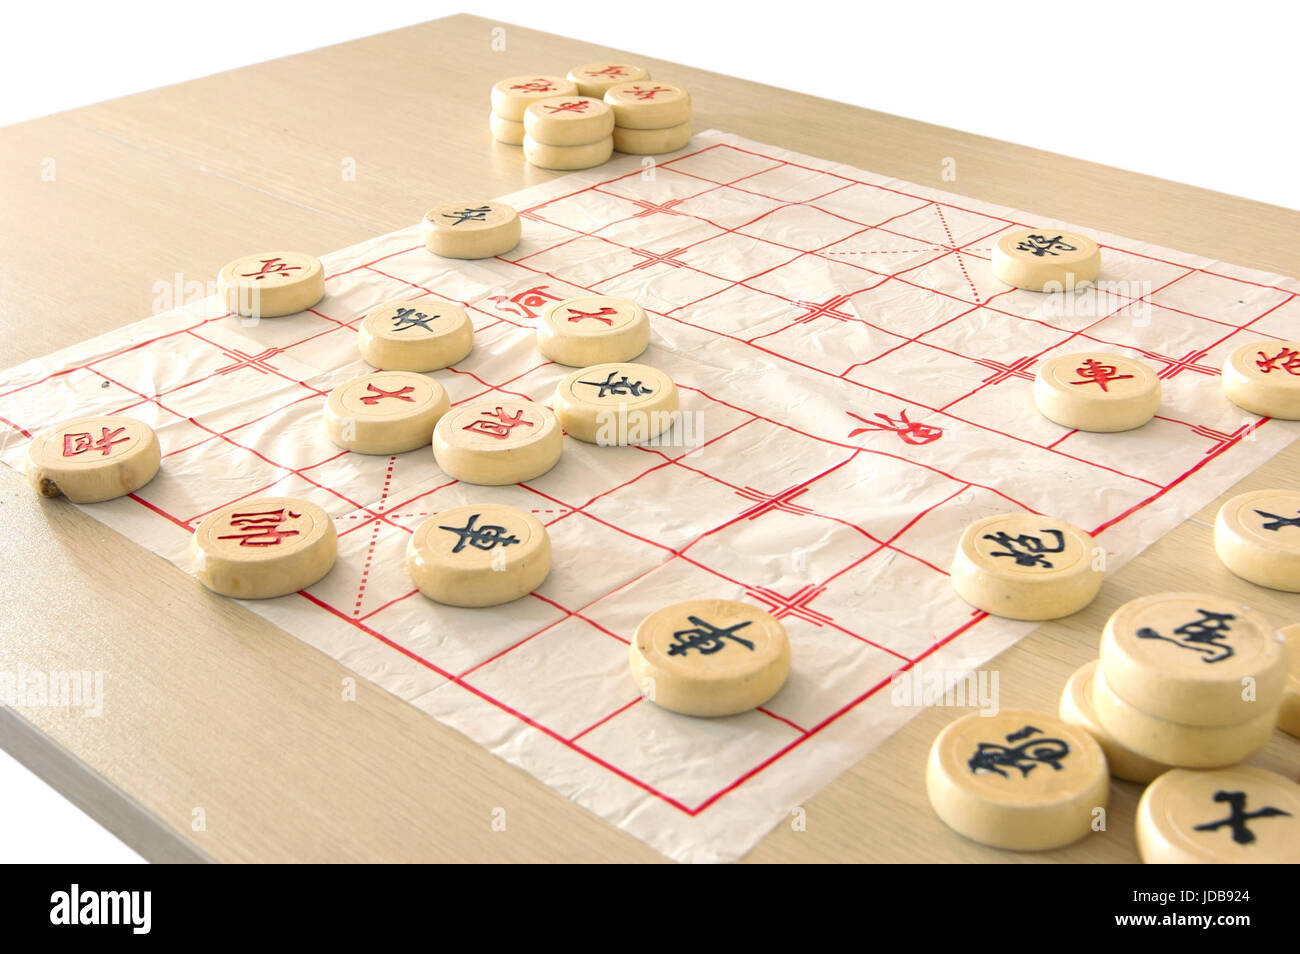 Reconstructing an early 12th century board game (chess and